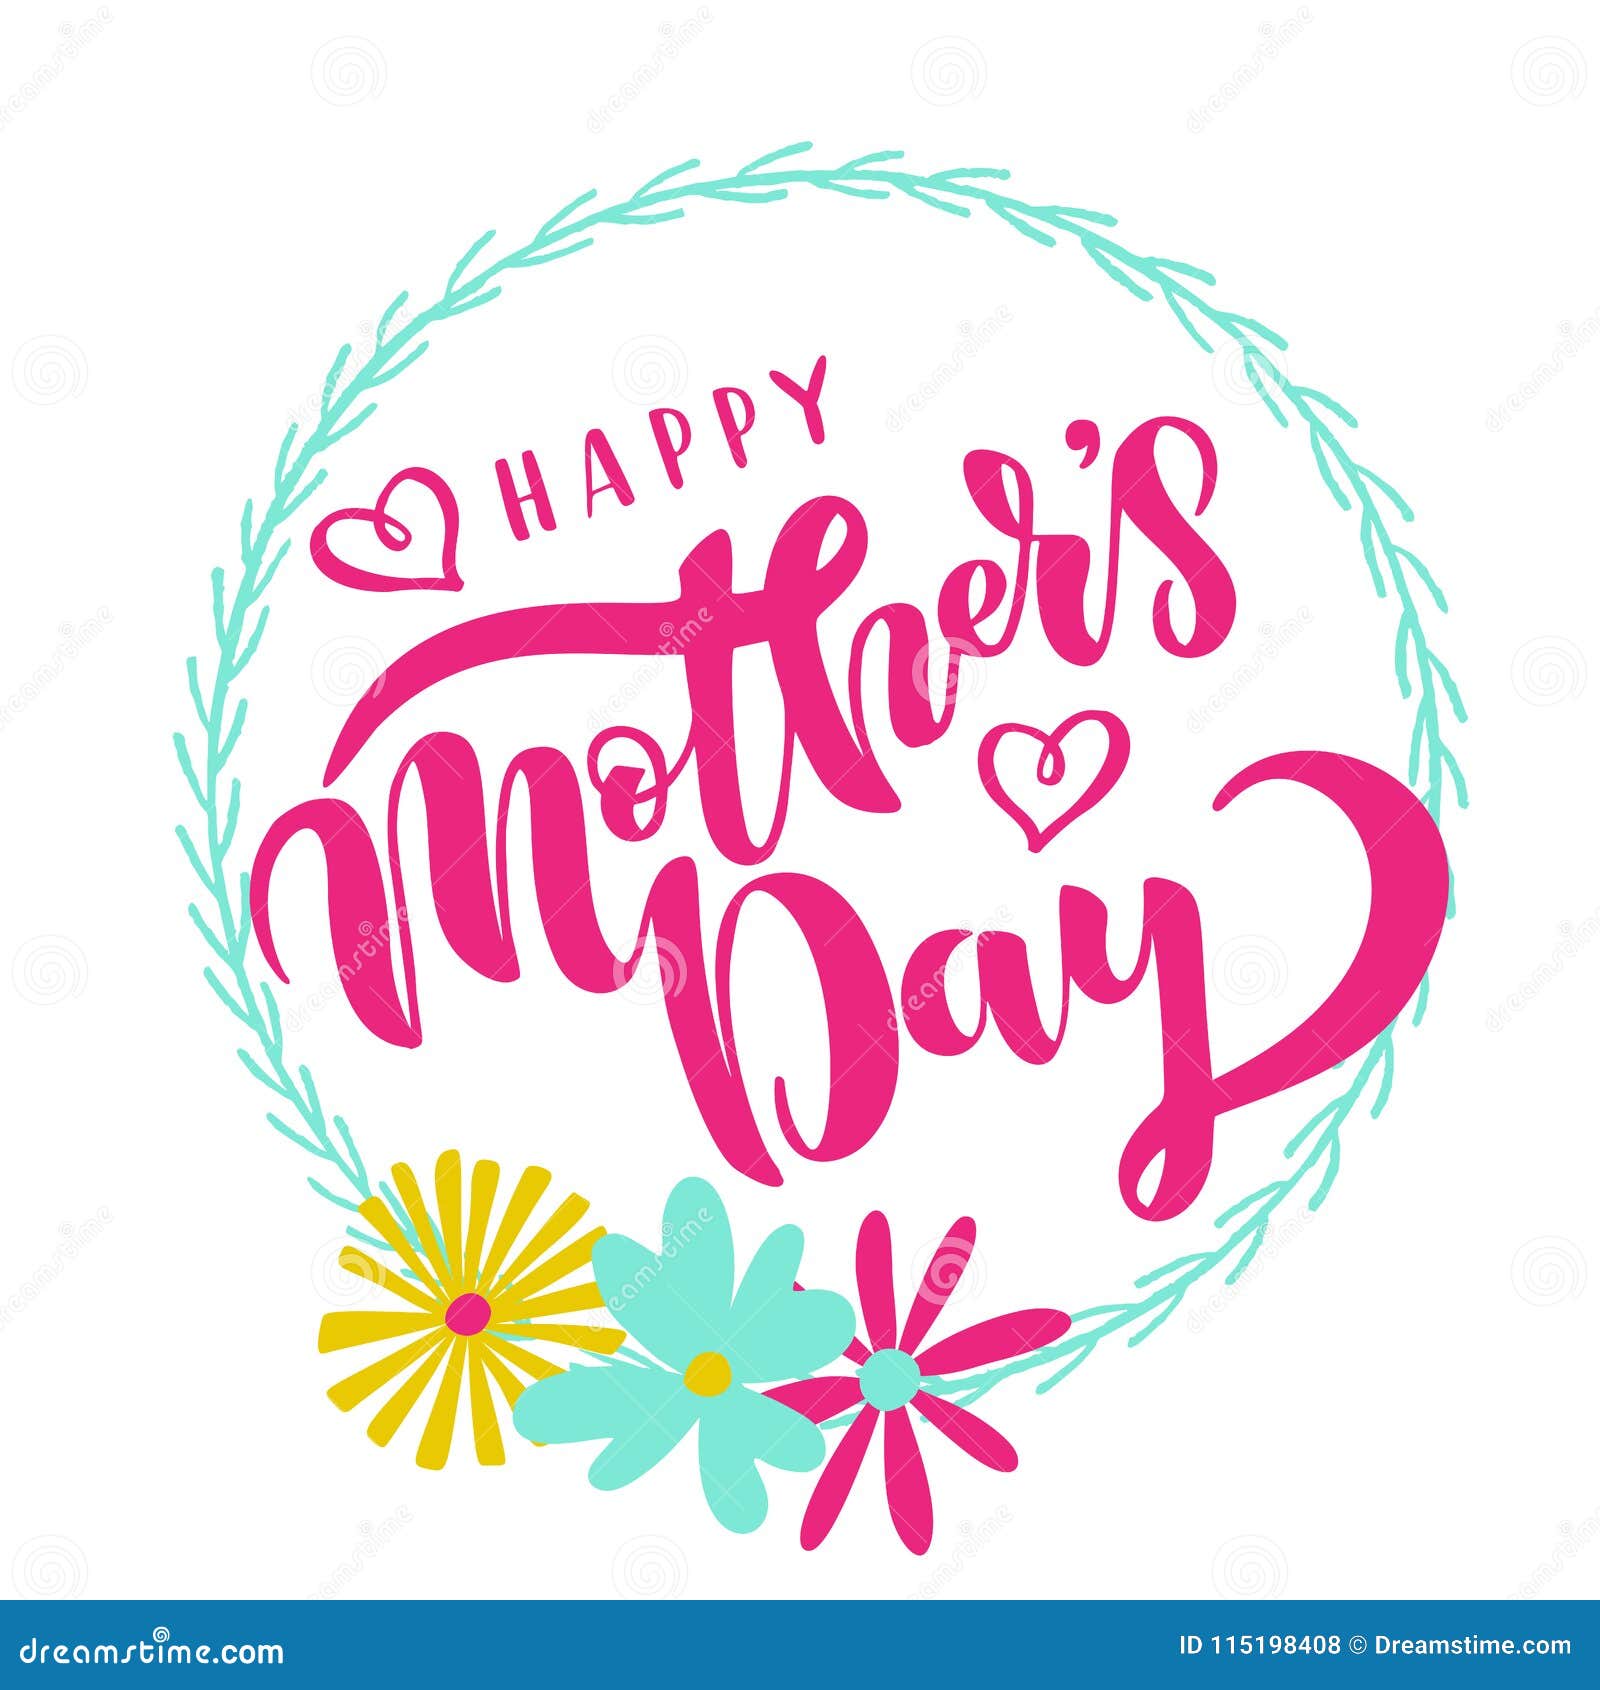 Happy Mothers Day Greeting Card Template Stock Illustration In Mothers Day Card Templates